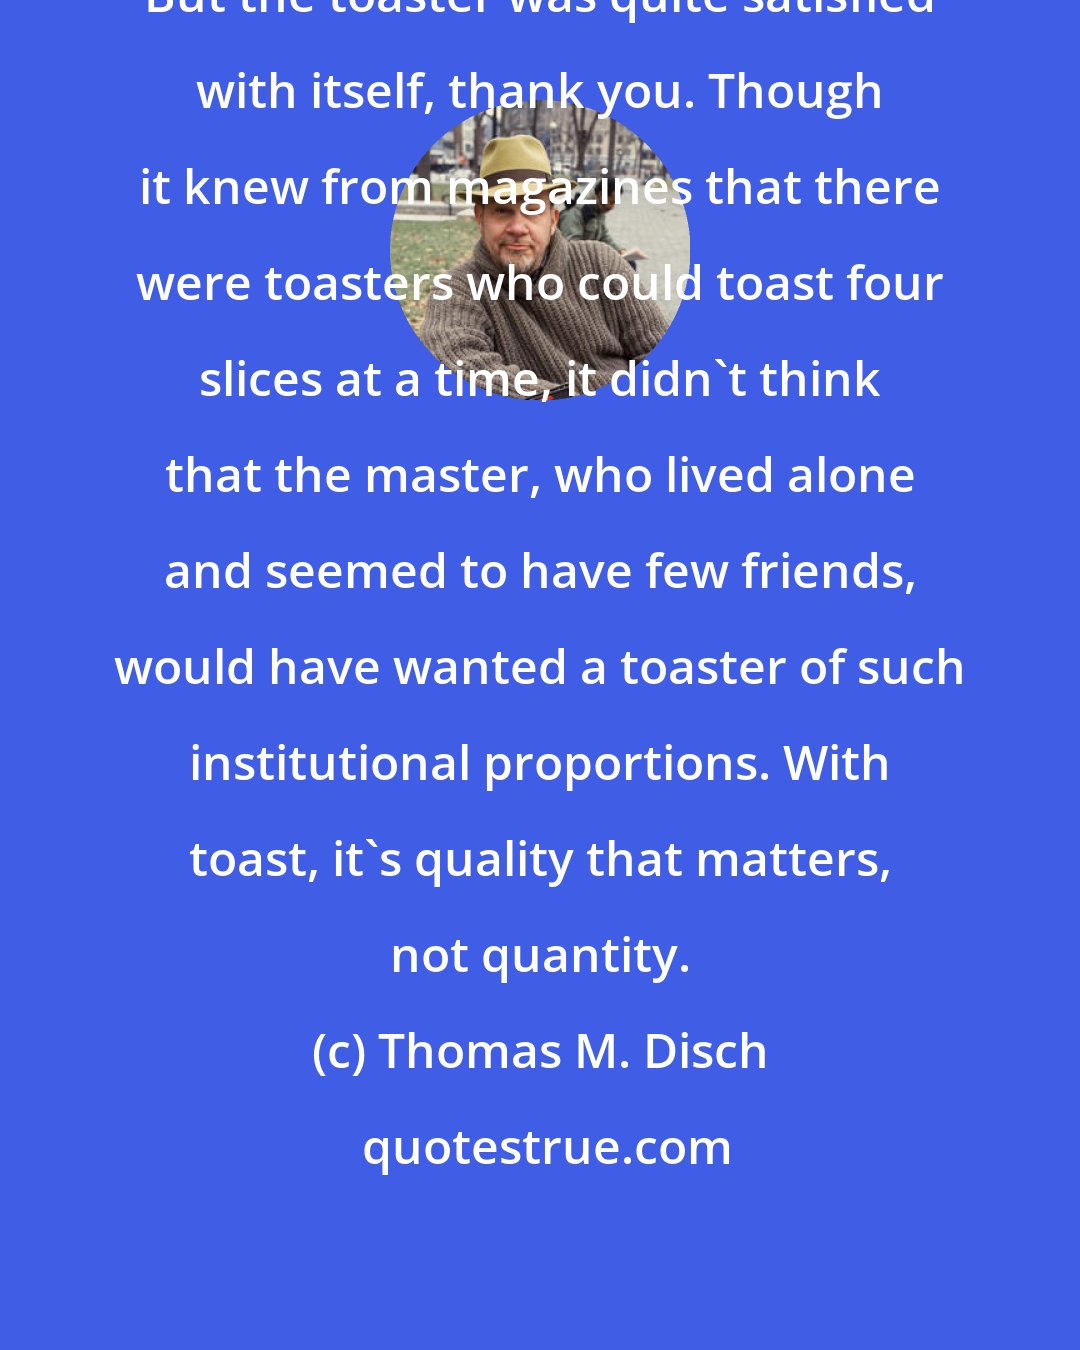 Thomas M. Disch: But the toaster was quite satisfied with itself, thank you. Though it knew from magazines that there were toasters who could toast four slices at a time, it didn't think that the master, who lived alone and seemed to have few friends, would have wanted a toaster of such institutional proportions. With toast, it's quality that matters, not quantity.